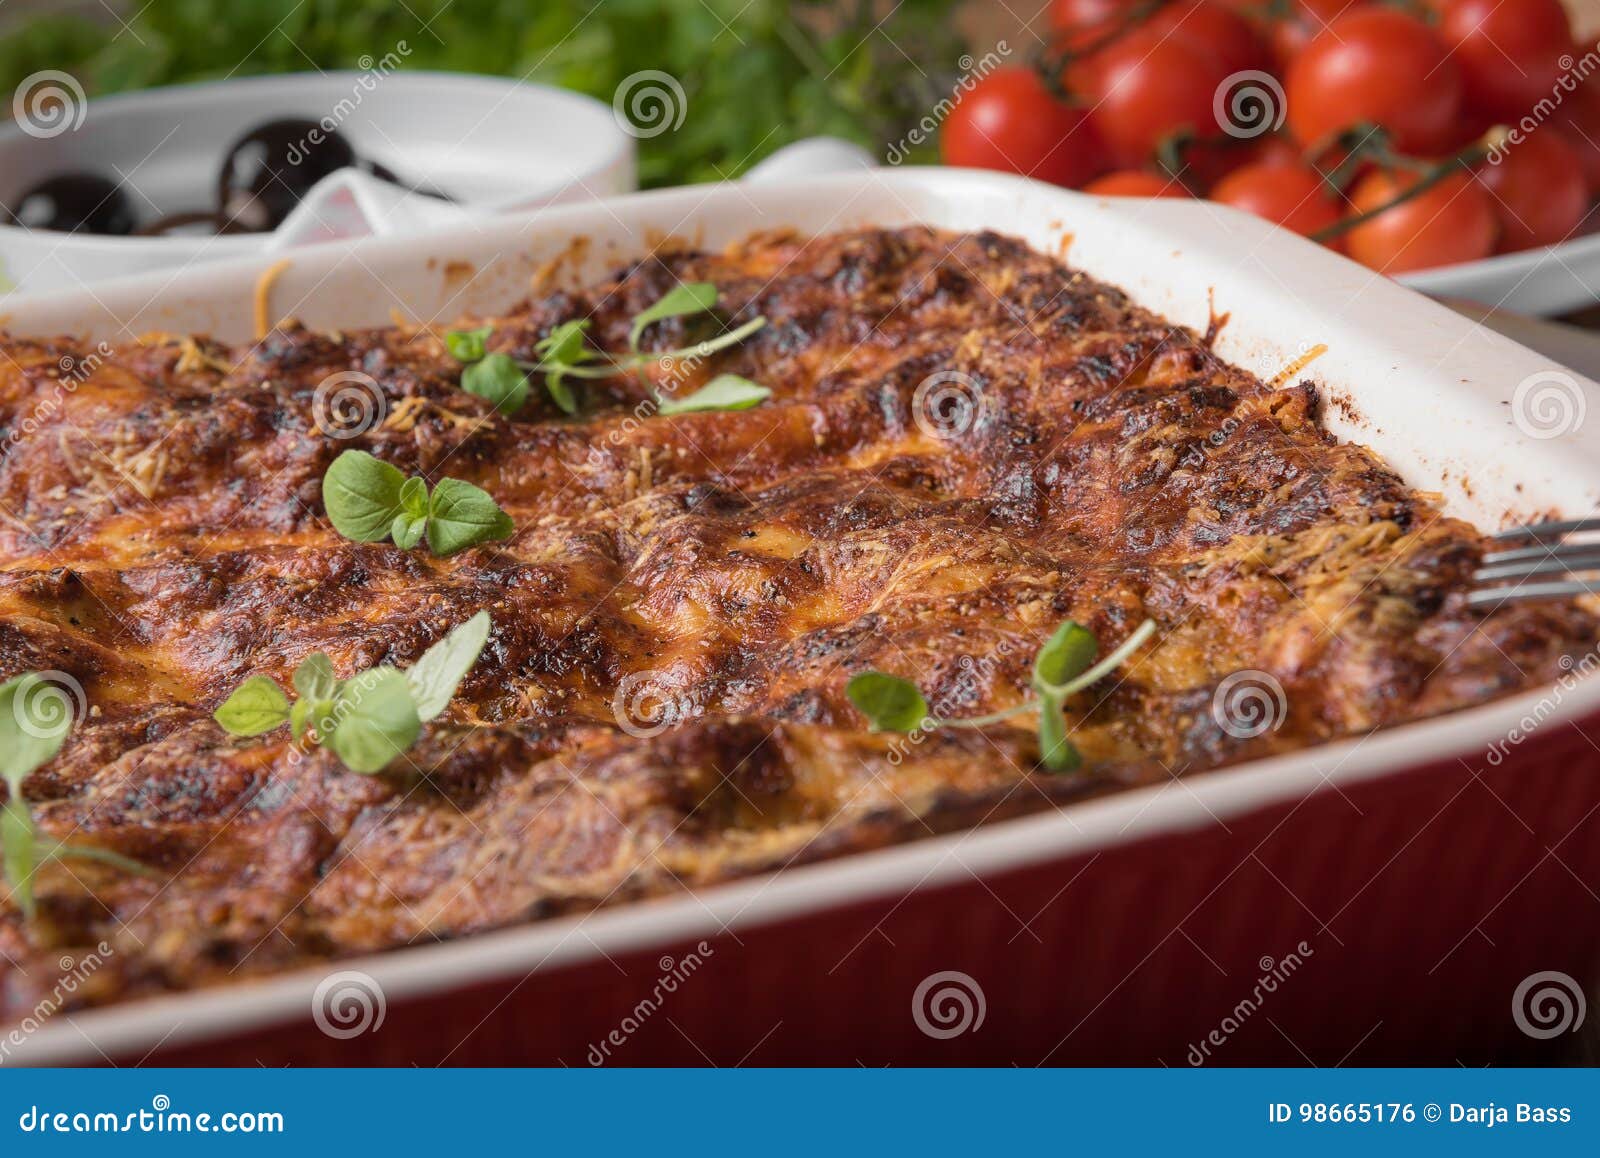 Fresh Baked Lasagne In Red Dish With Black Olives Tomatoes And Chilli ...